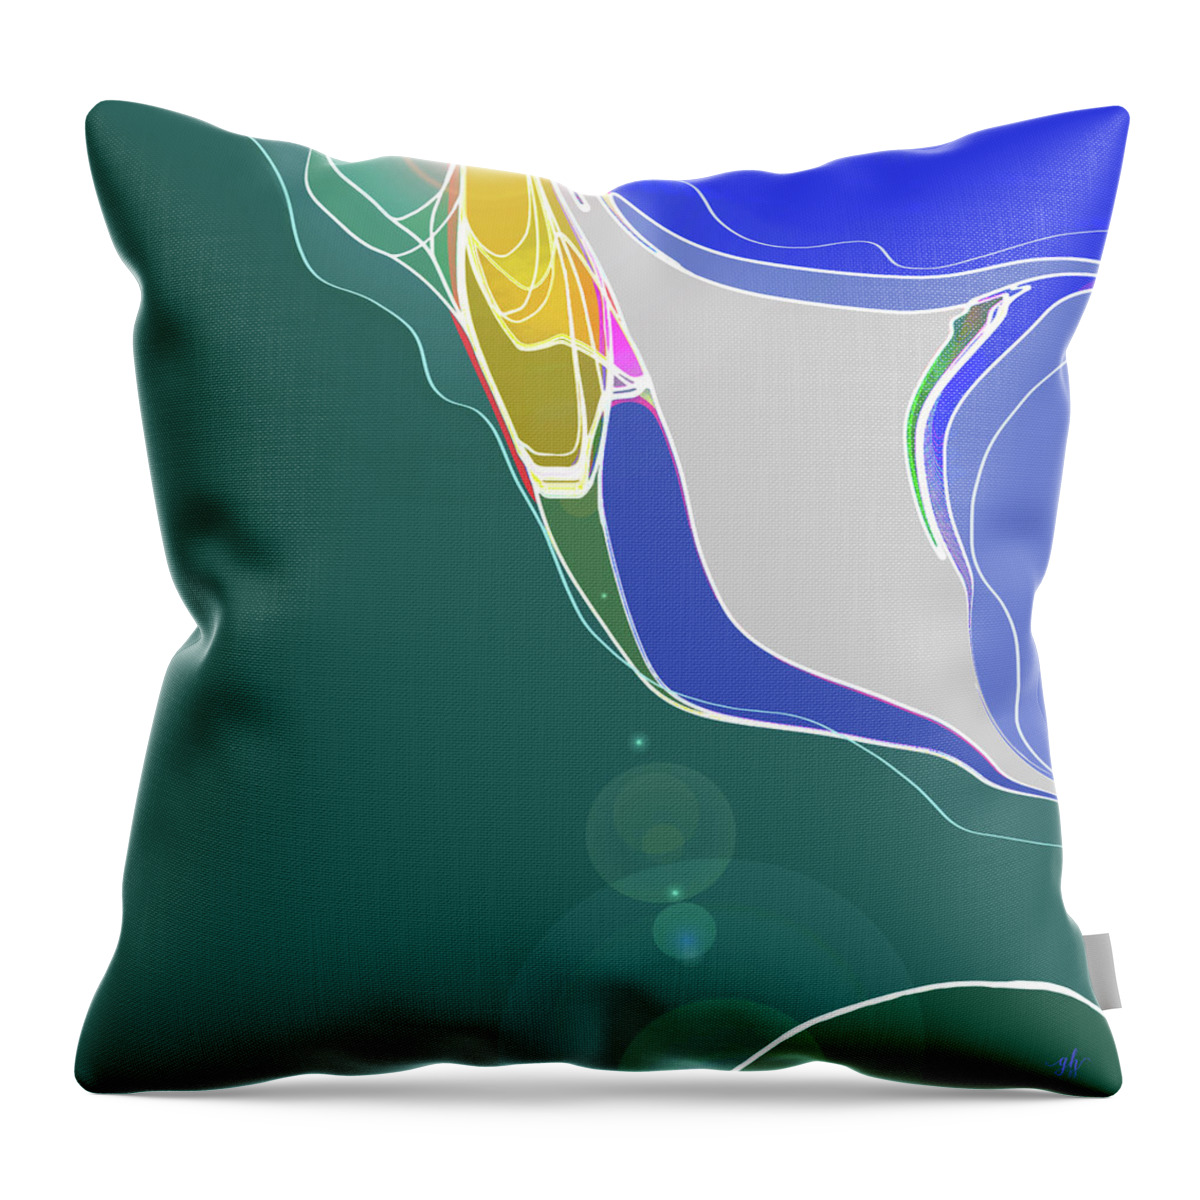 Abstract Throw Pillow featuring the digital art Summer's End by Gina Harrison